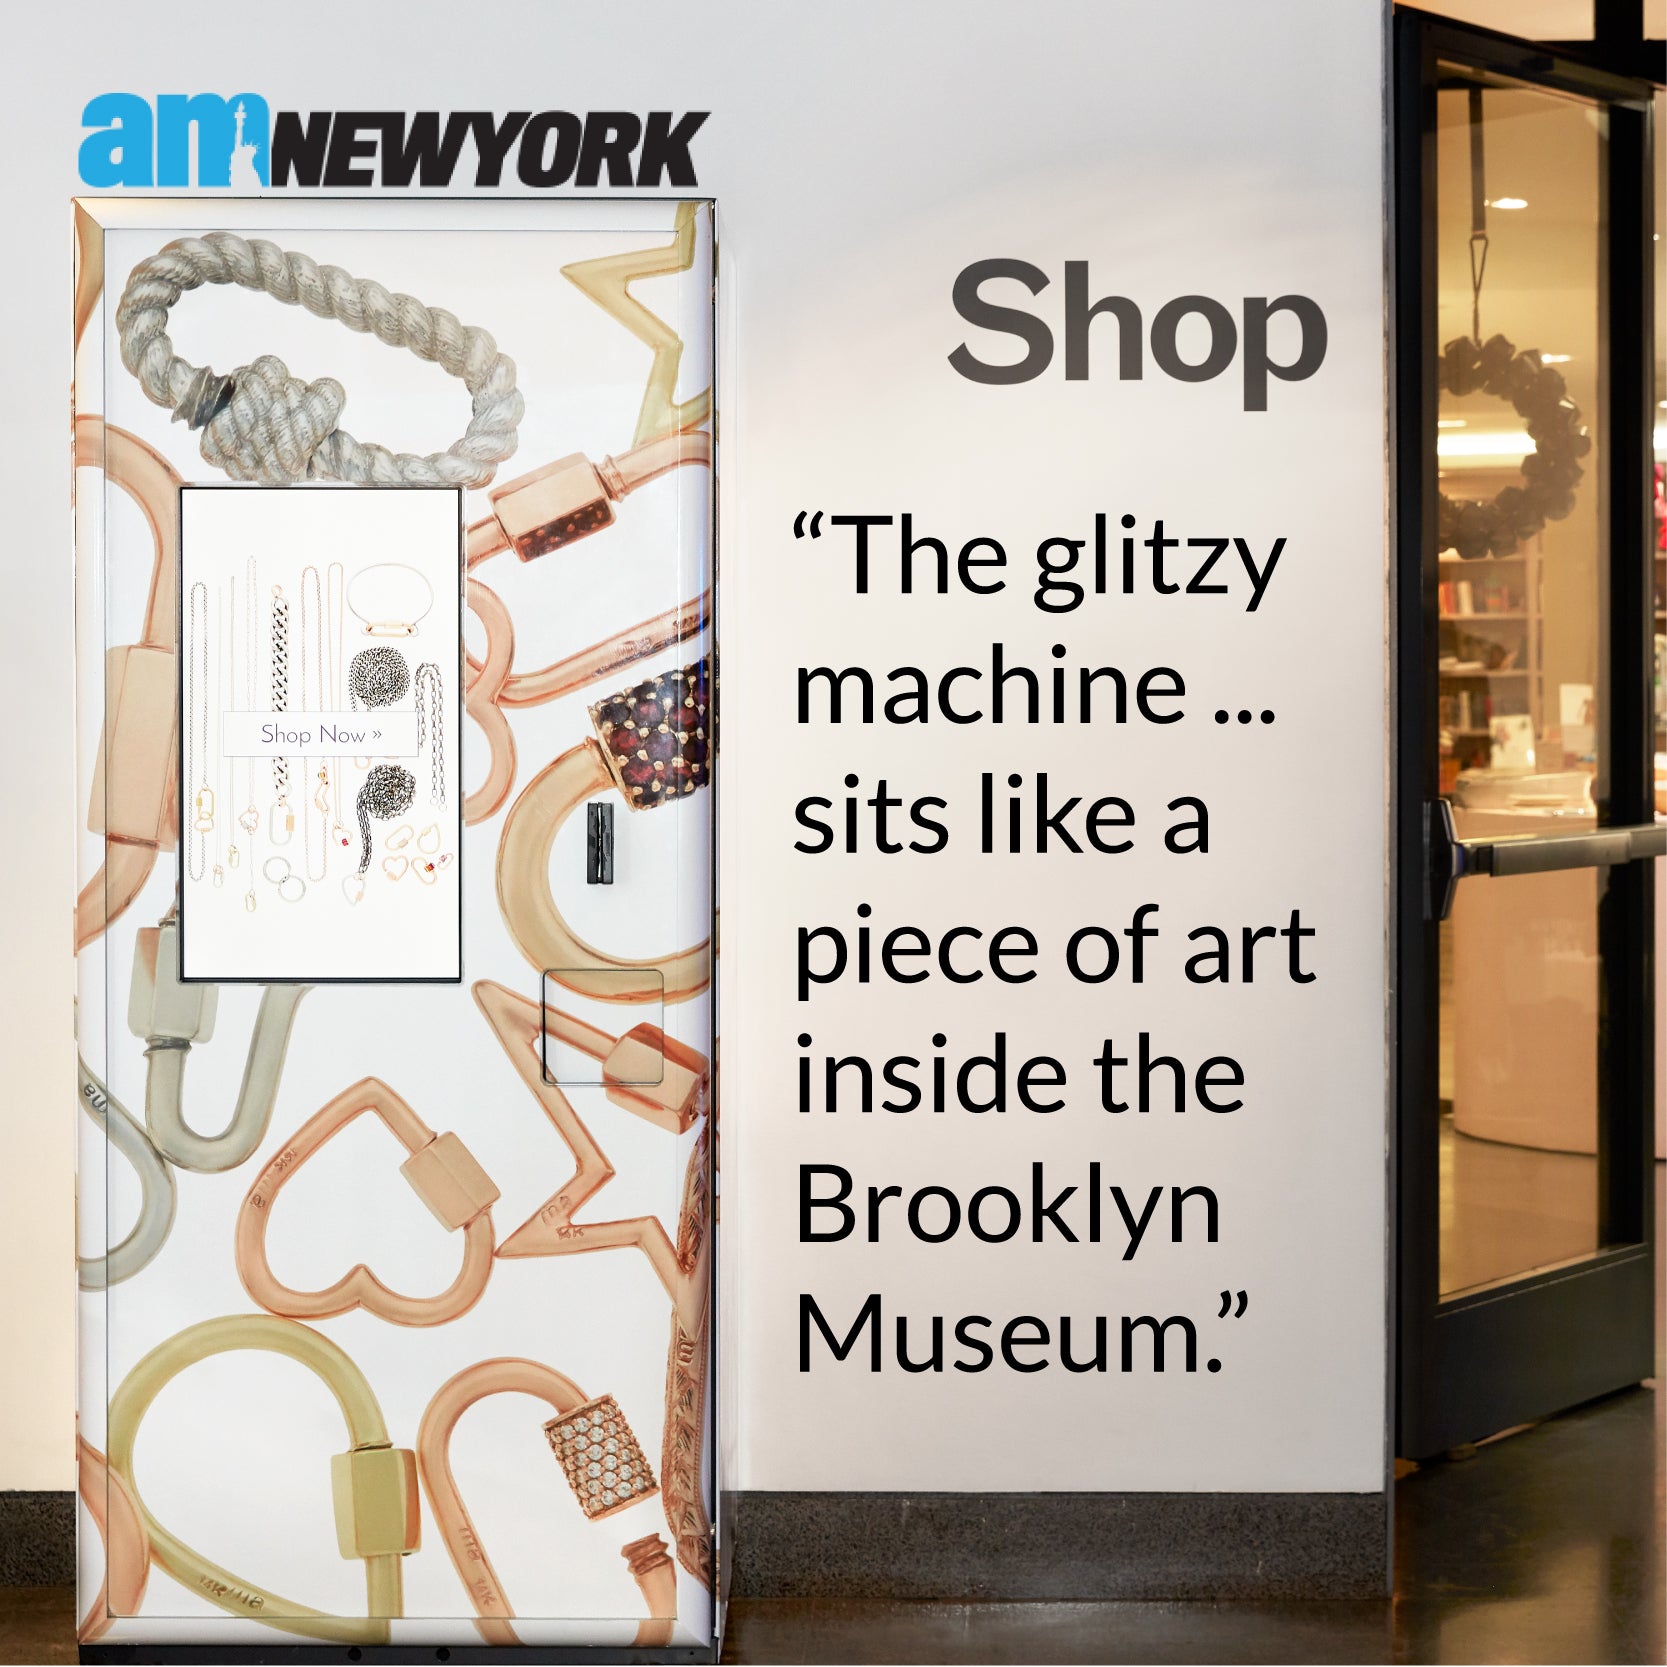 Vending machine sells fine jewelry inside the Brooklyn Museum, and could be the first of many